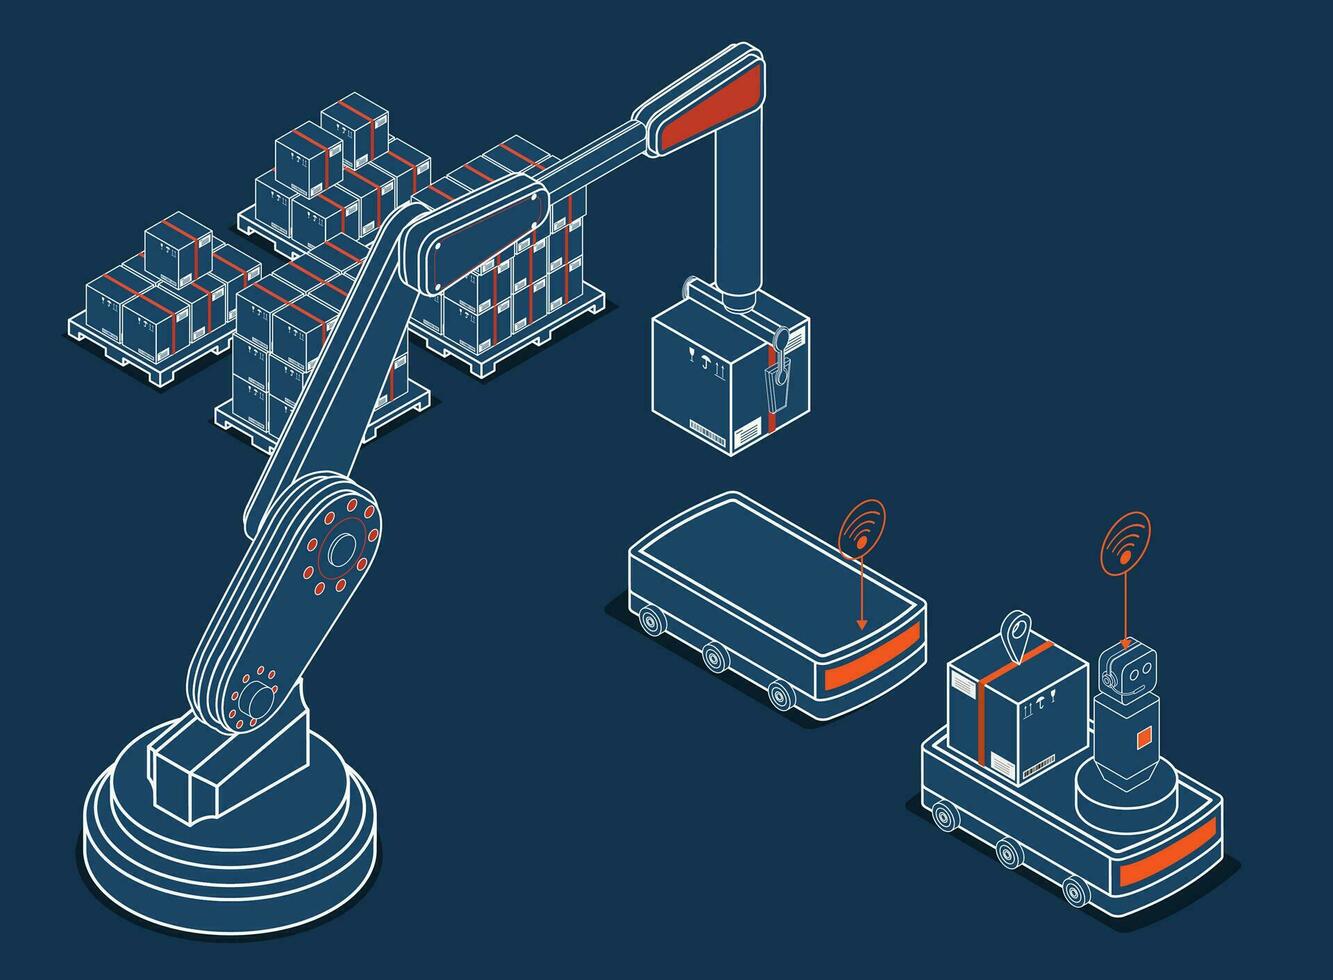 Automation Industry 4.0 concept with Robot arm and cardboard boxes on Autonomous Robot Transportation operation service. Vector illustration eps10